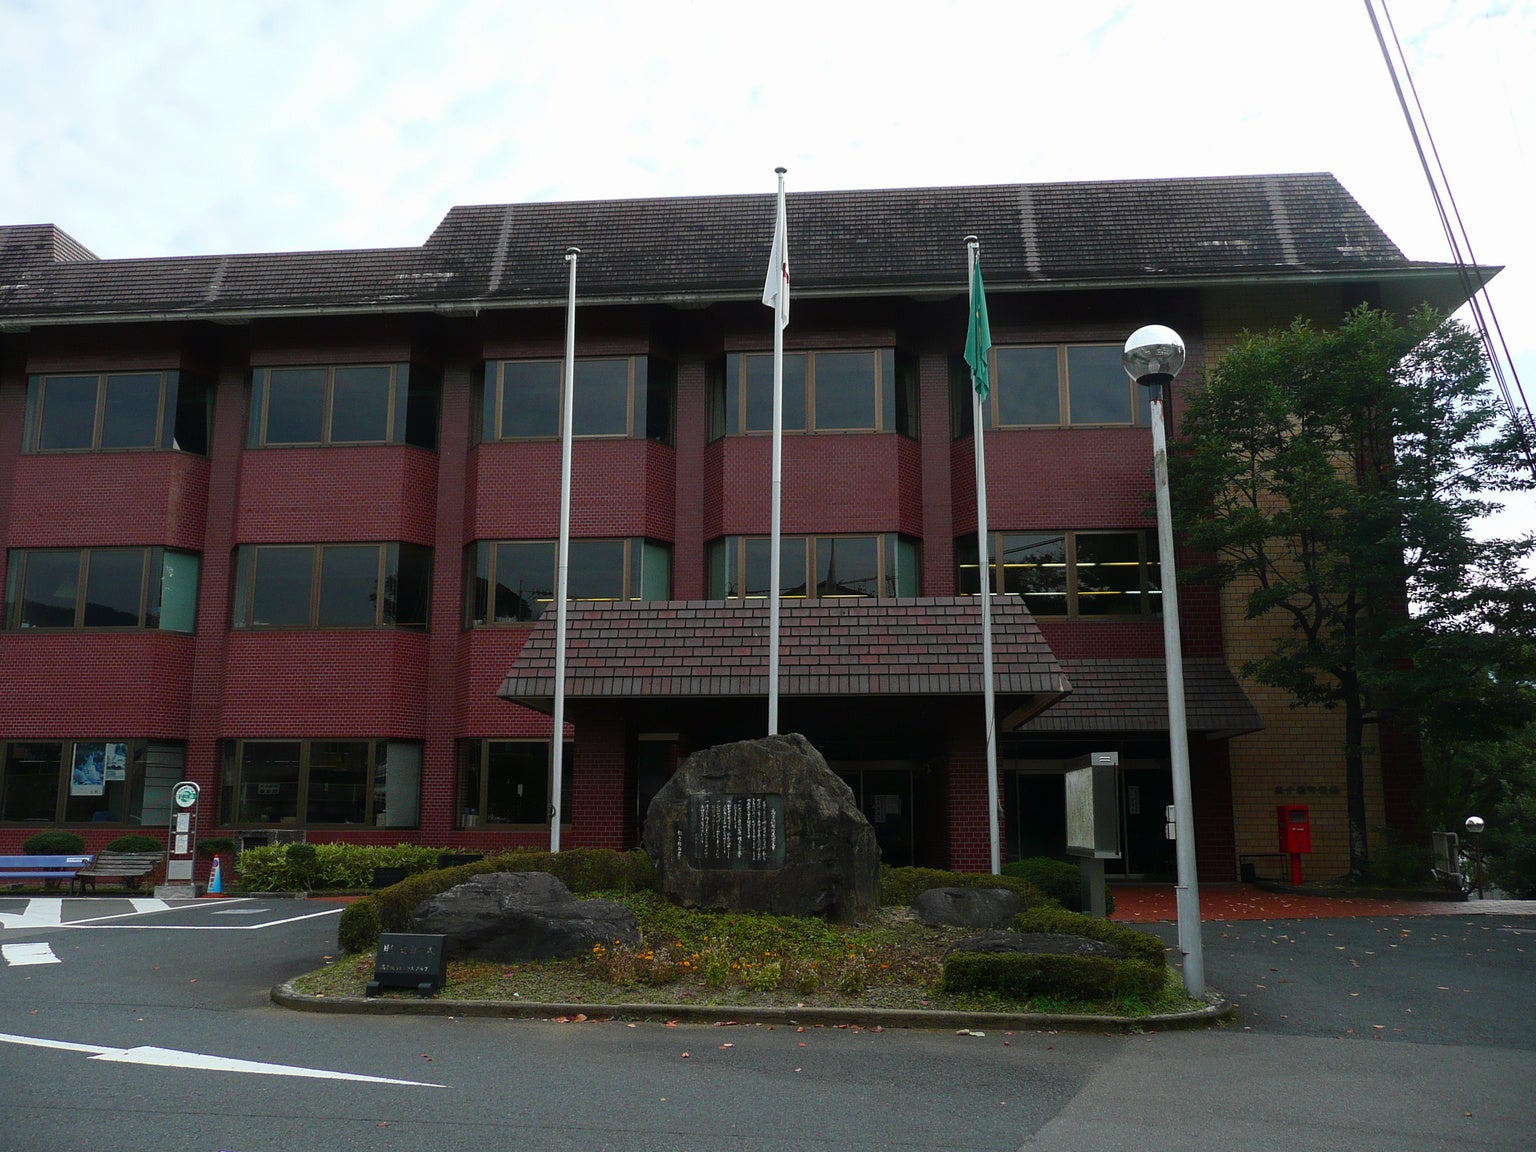 The town office in Takachiho